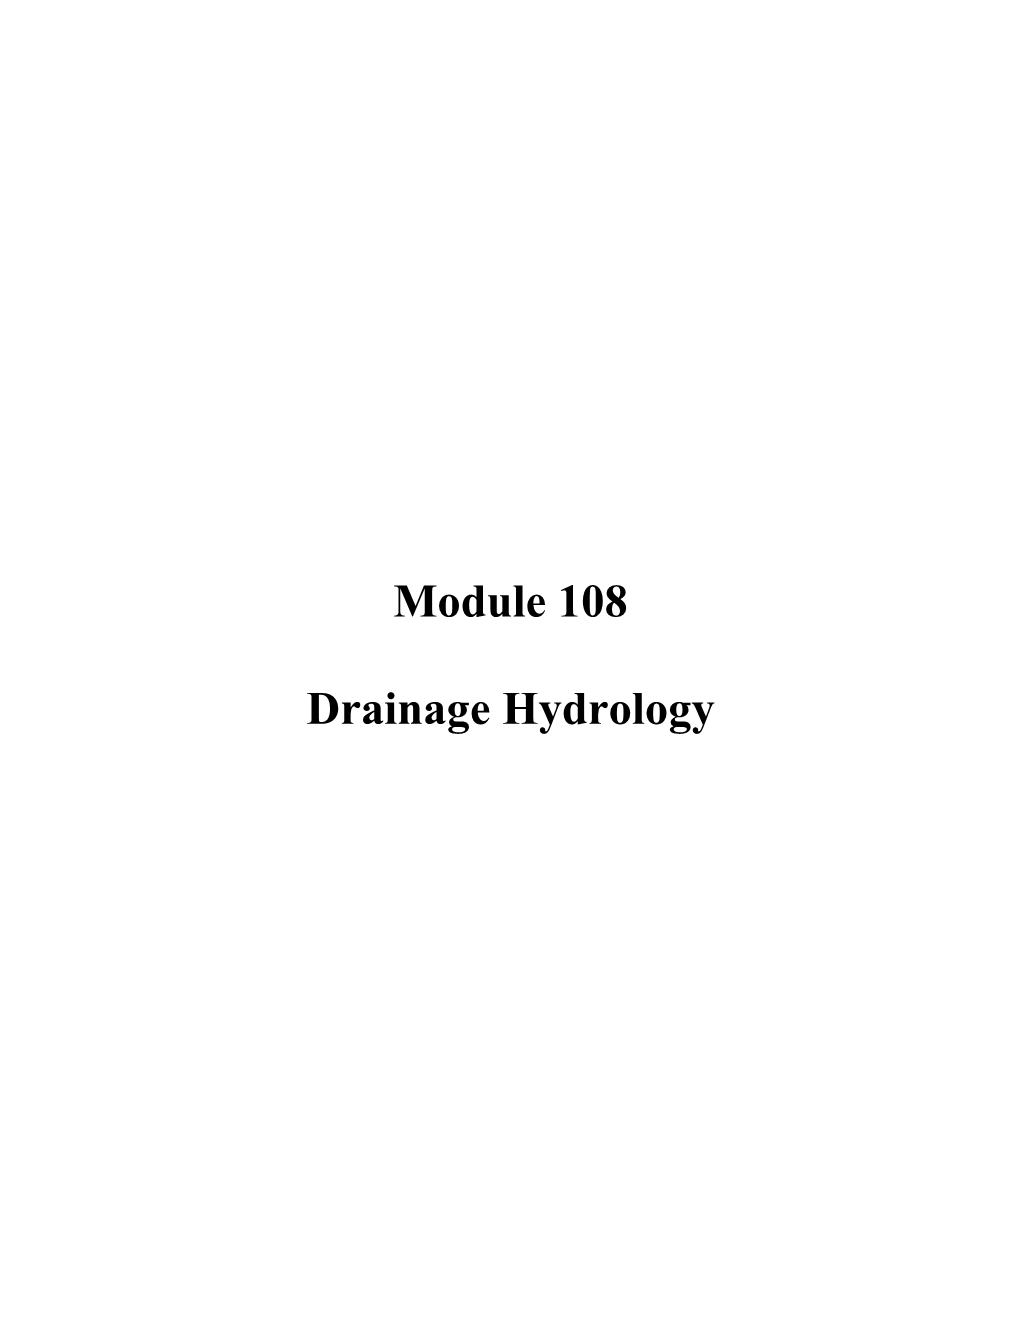 Module 108 Drainage Hydrology Activity Questions